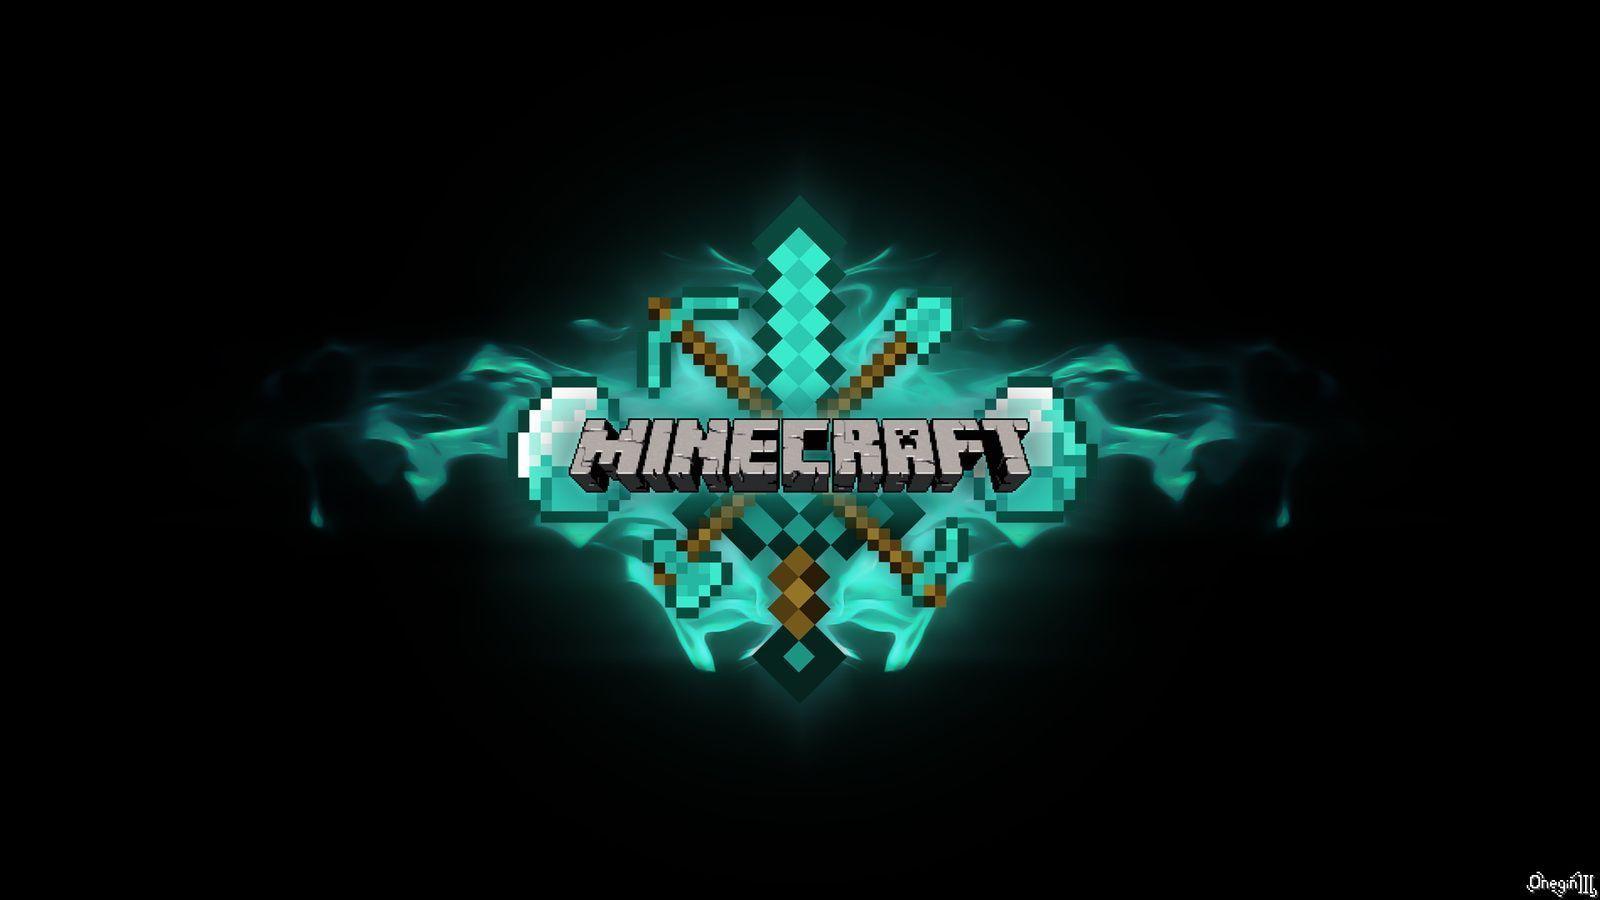 Minecraft Pc Wallpapers Top Free Minecraft Pc Backgrounds Wallpaperaccess